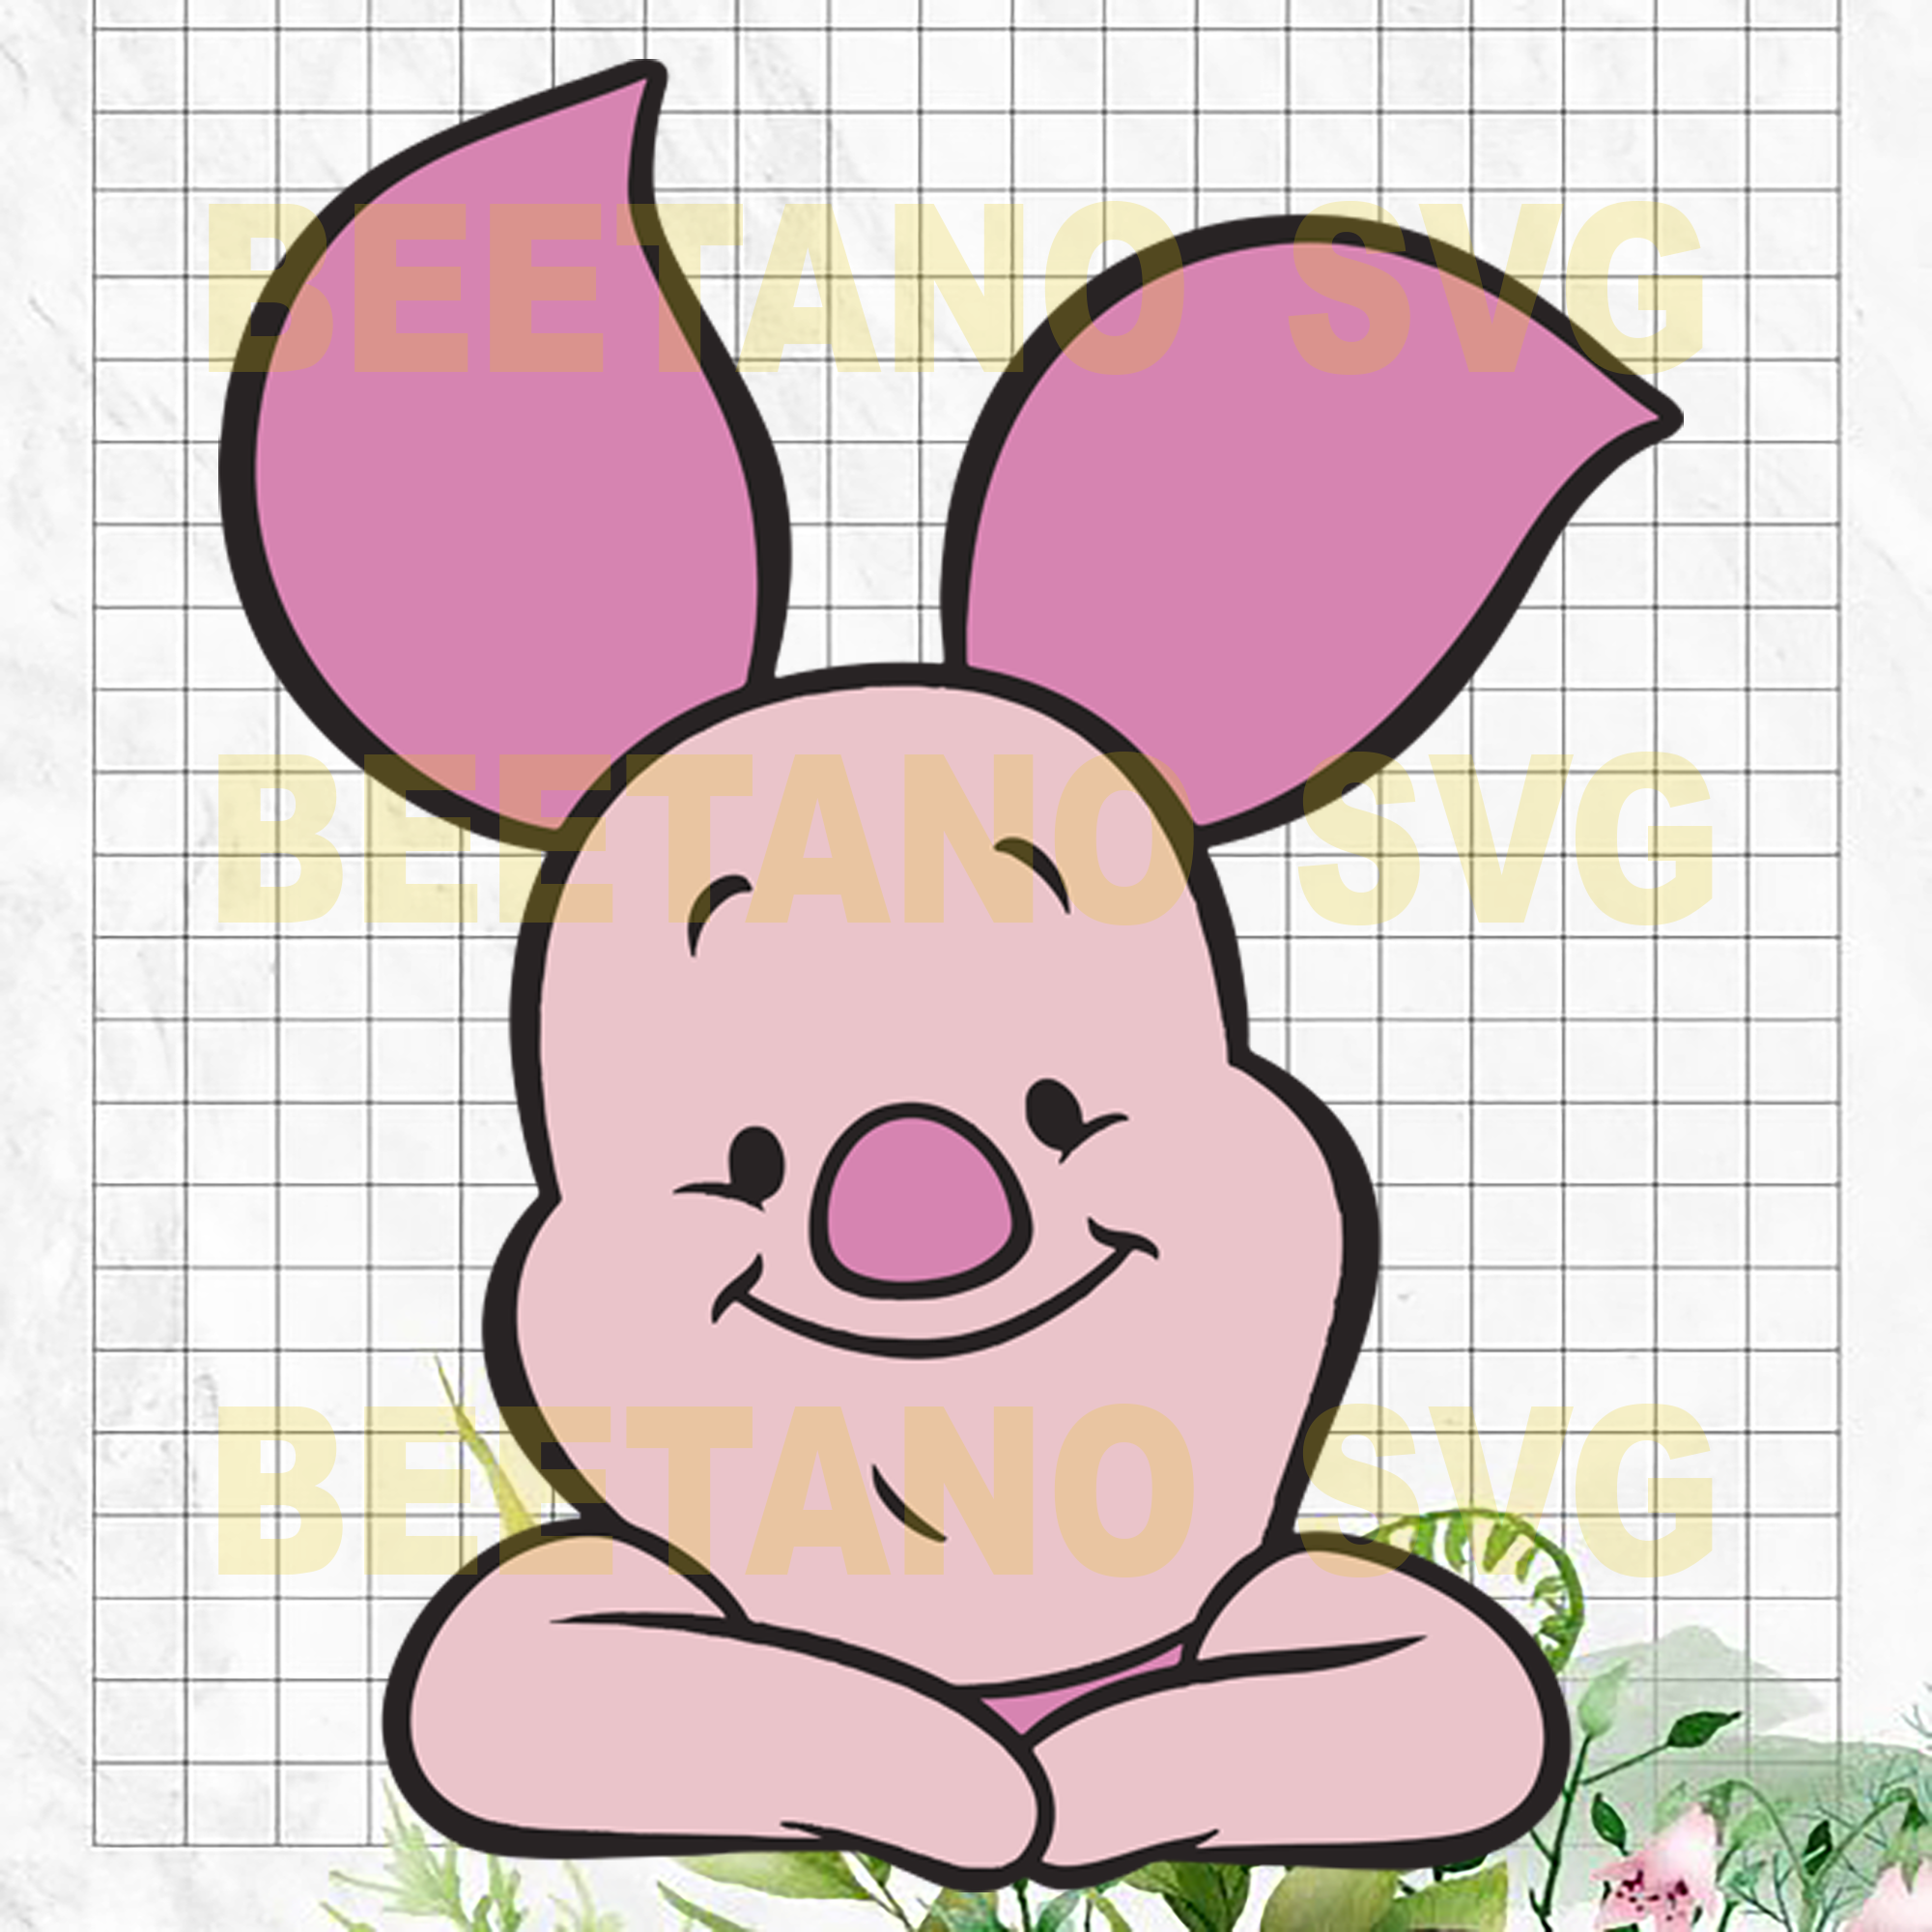 Piglet Winnie Pooh Svg Piglet Winnie Pooh Cutting Files For Cricut S Beetanosvg Scalable Vector Graphics